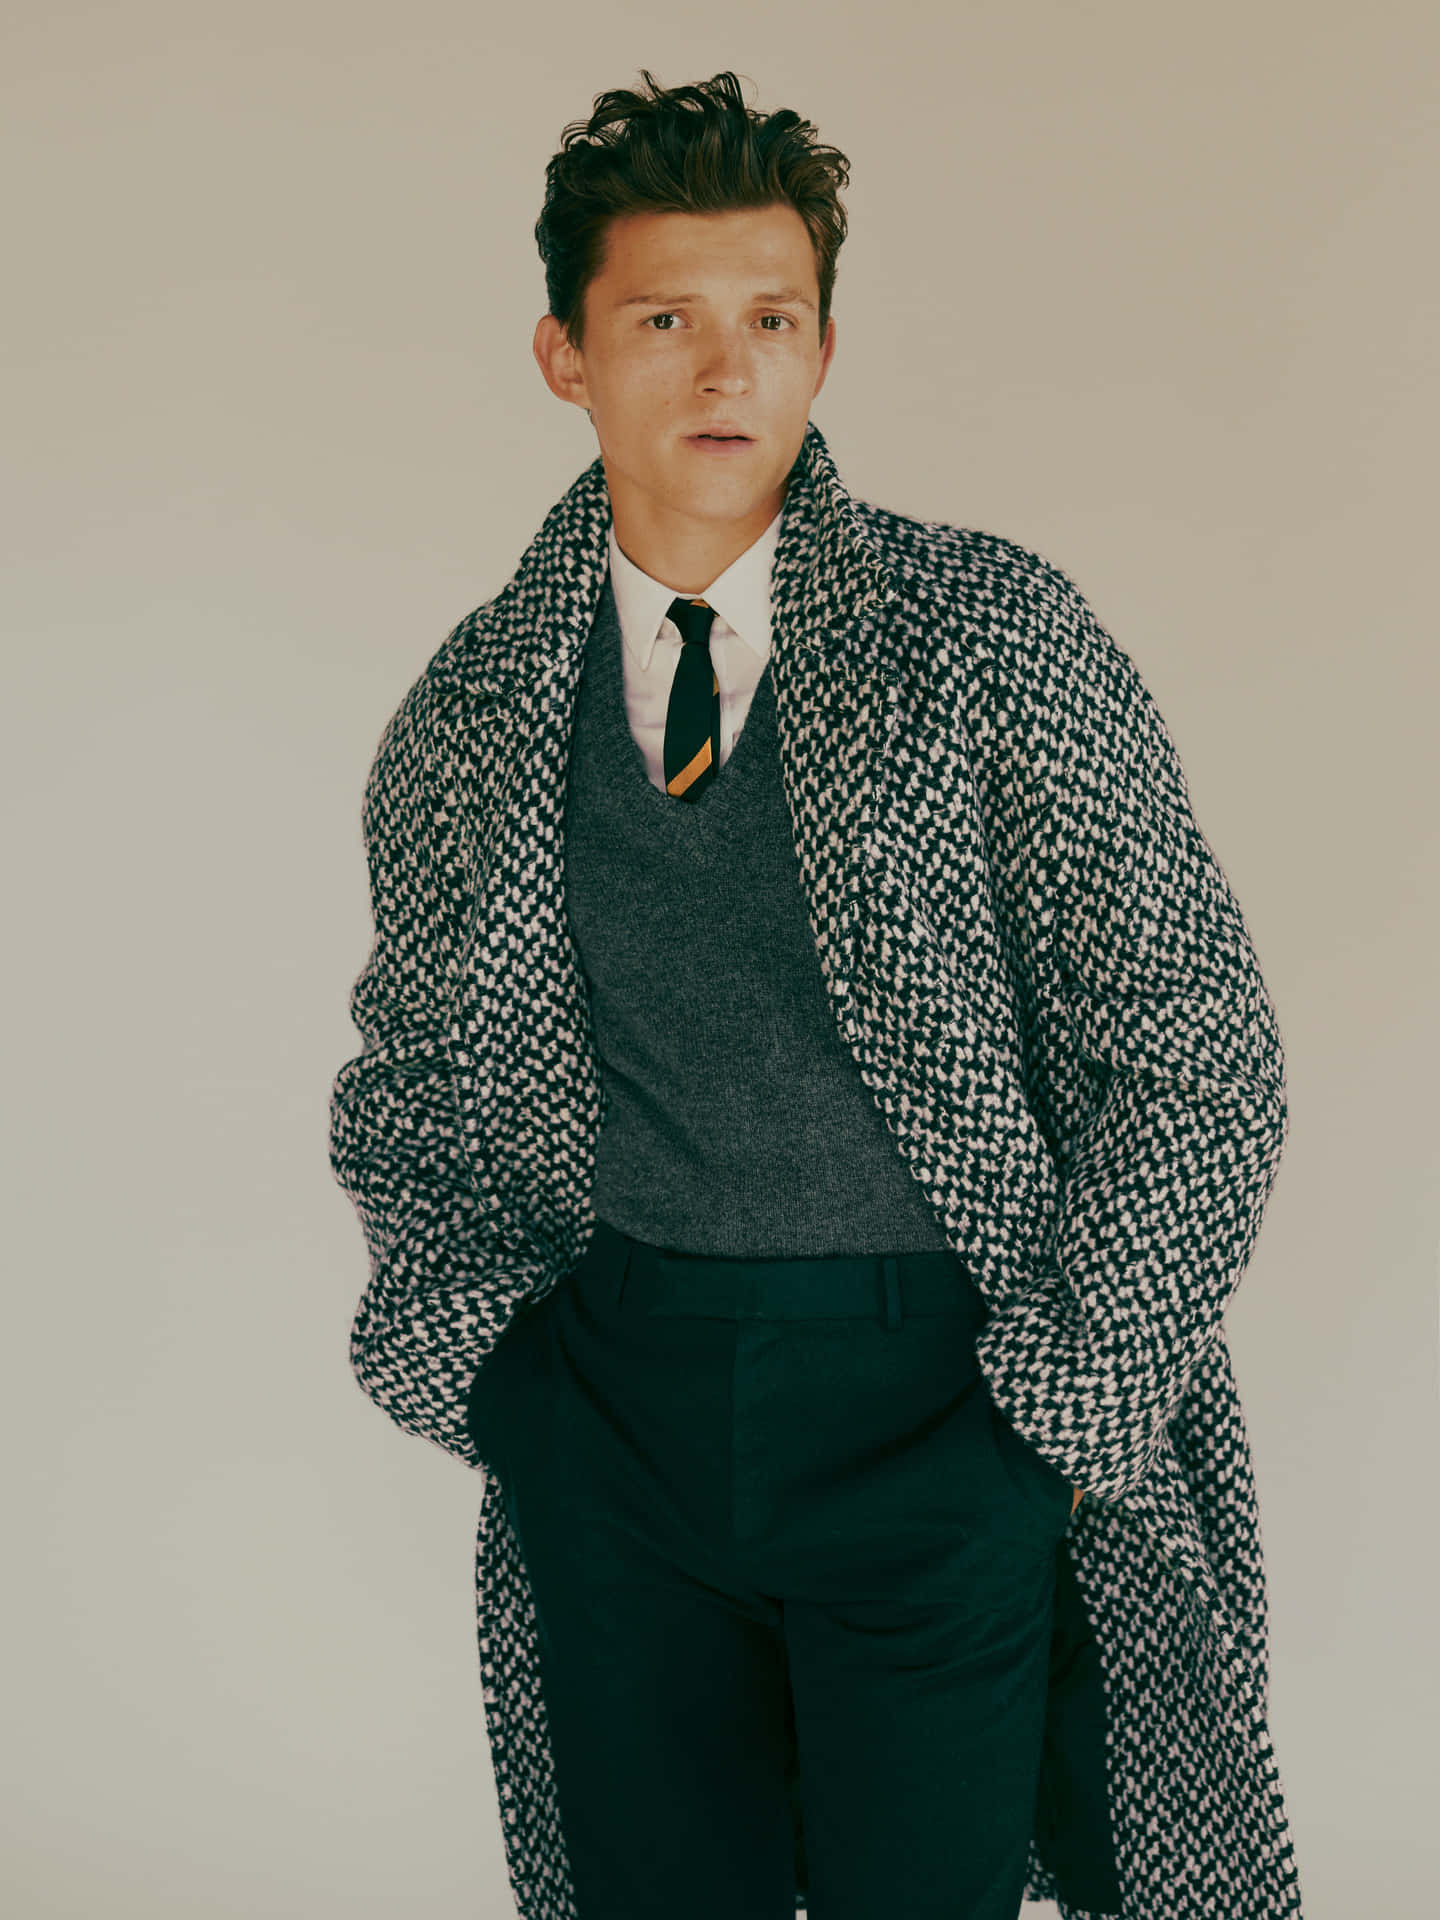 Tom Holland looking sharp in his new suit Wallpaper